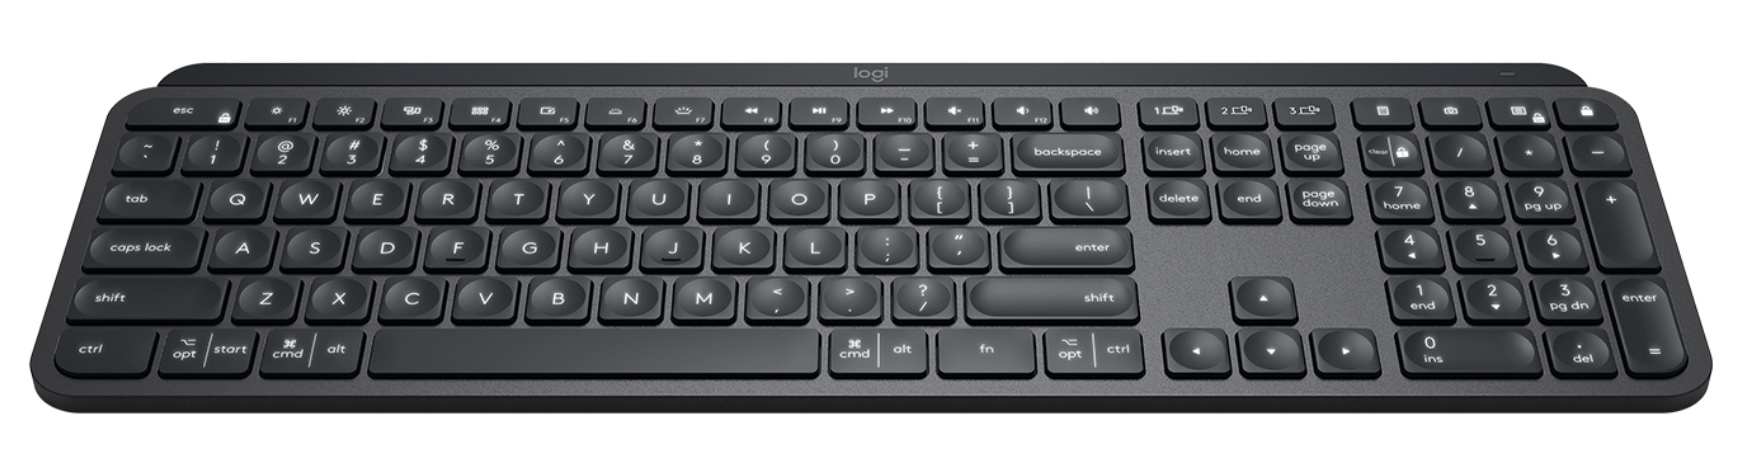 Unlike the Magic Keyboard, the MX Keys comes with media keys to activate specific functions such as volume control and media playback. Source: Logitech.